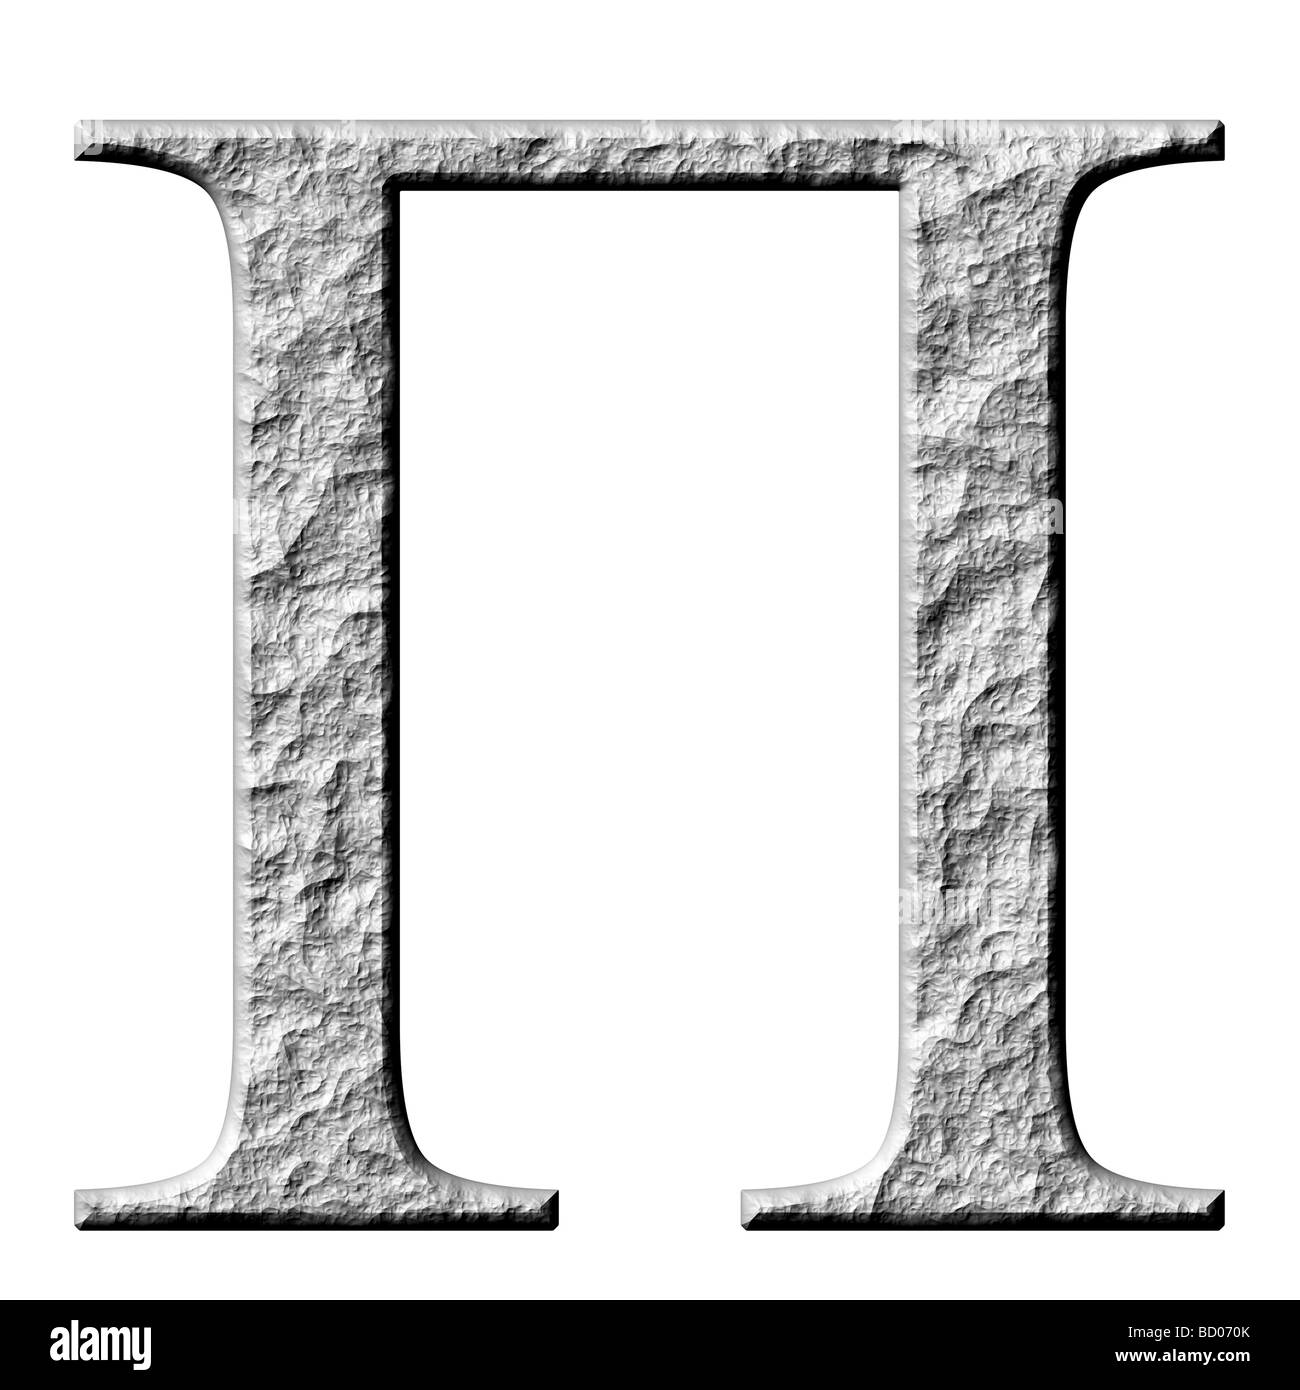 Greek Letter Pi High Resolution Stock Photography and Images - Alamy